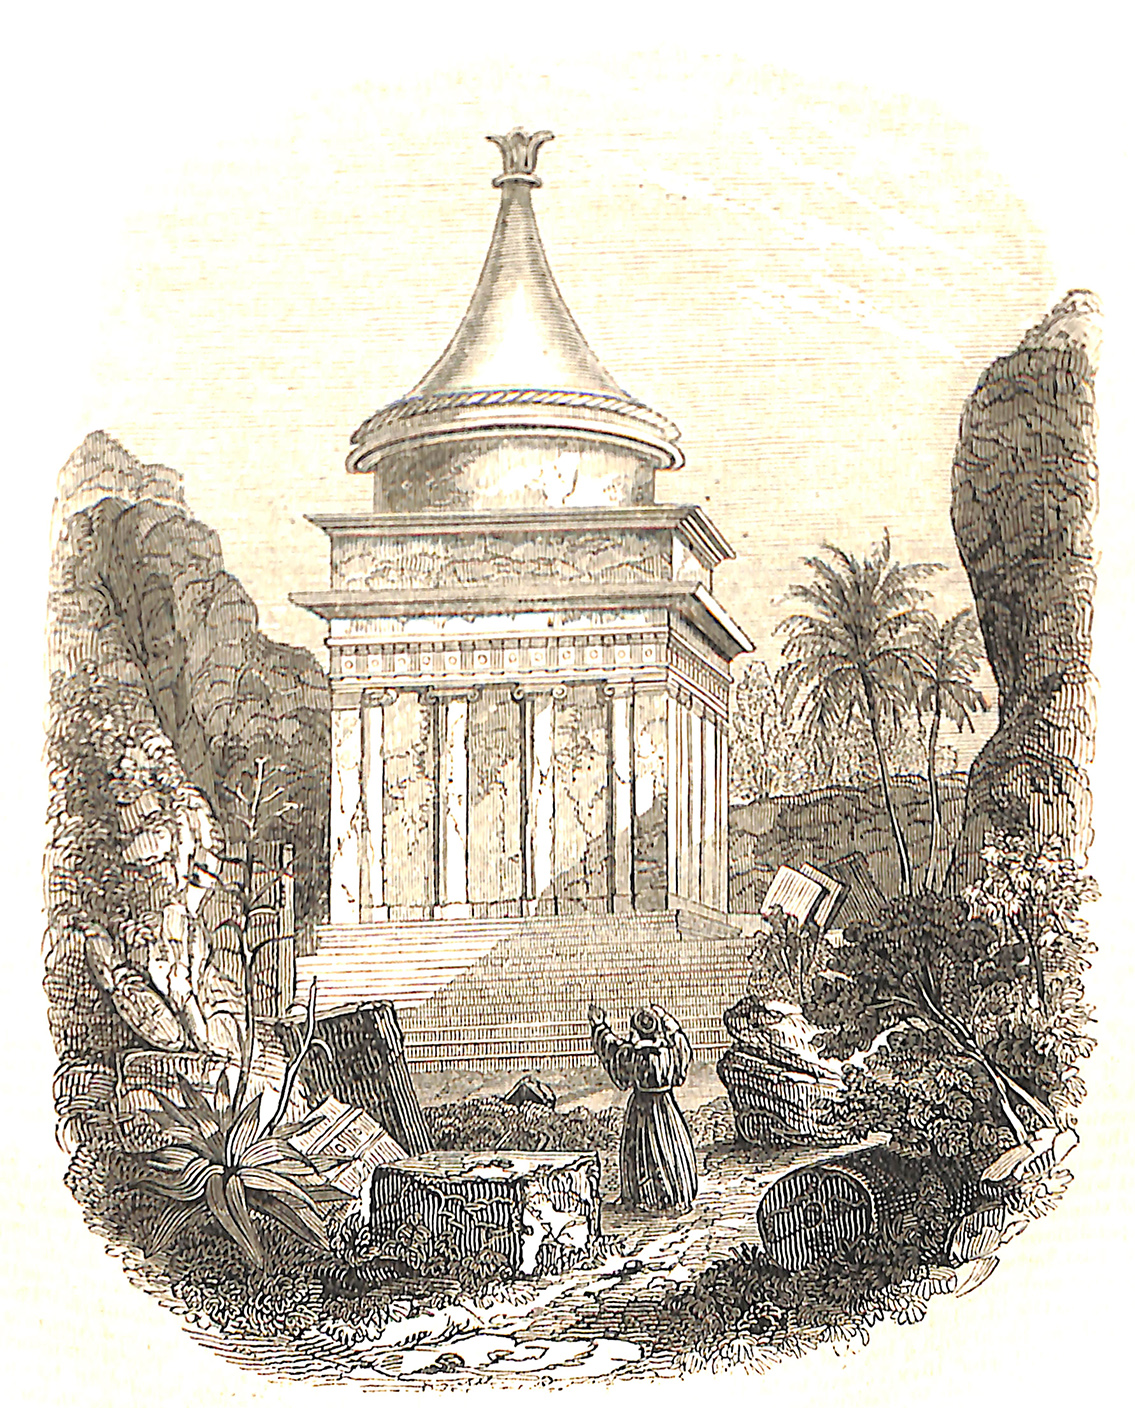 Absalom's Tomb. - From Cassas